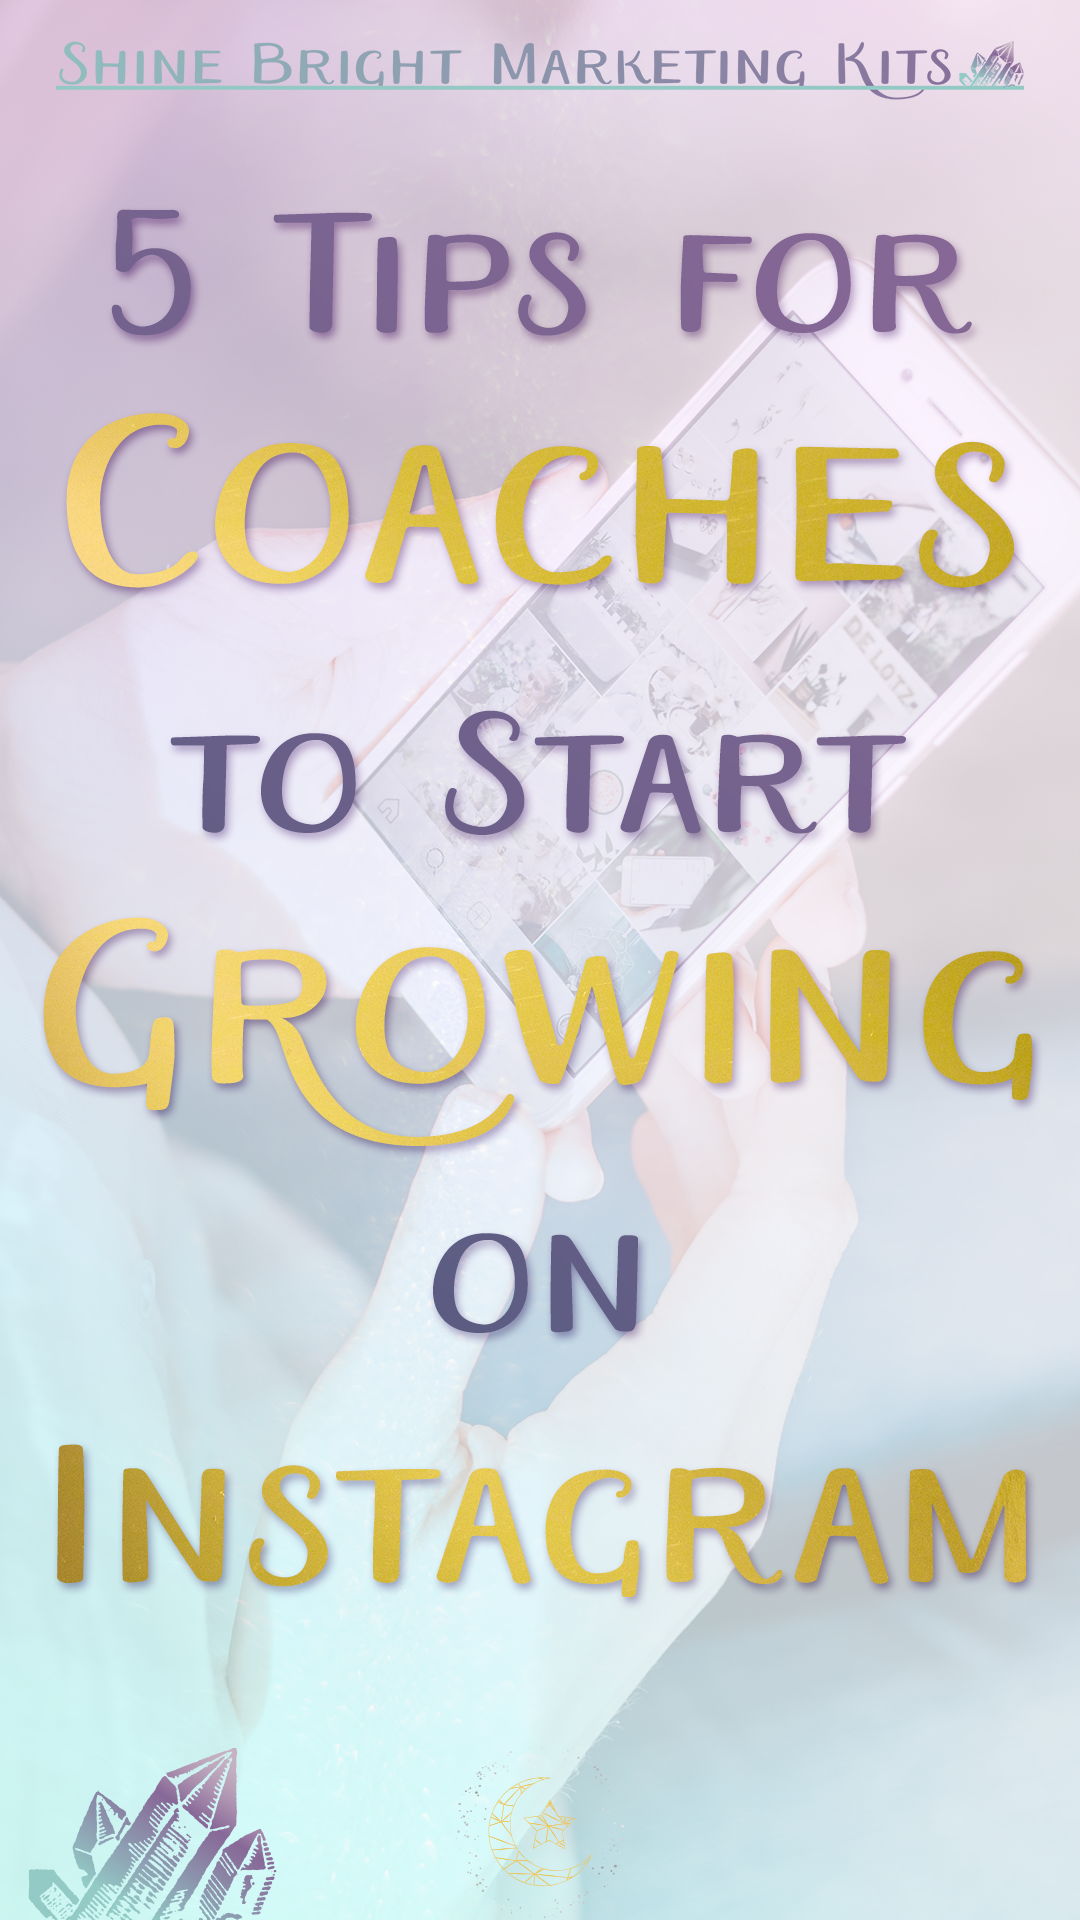 Instagram is the perfect platform to grow your audience & build brand awareness as a coach. These tips will help you launch with ease!